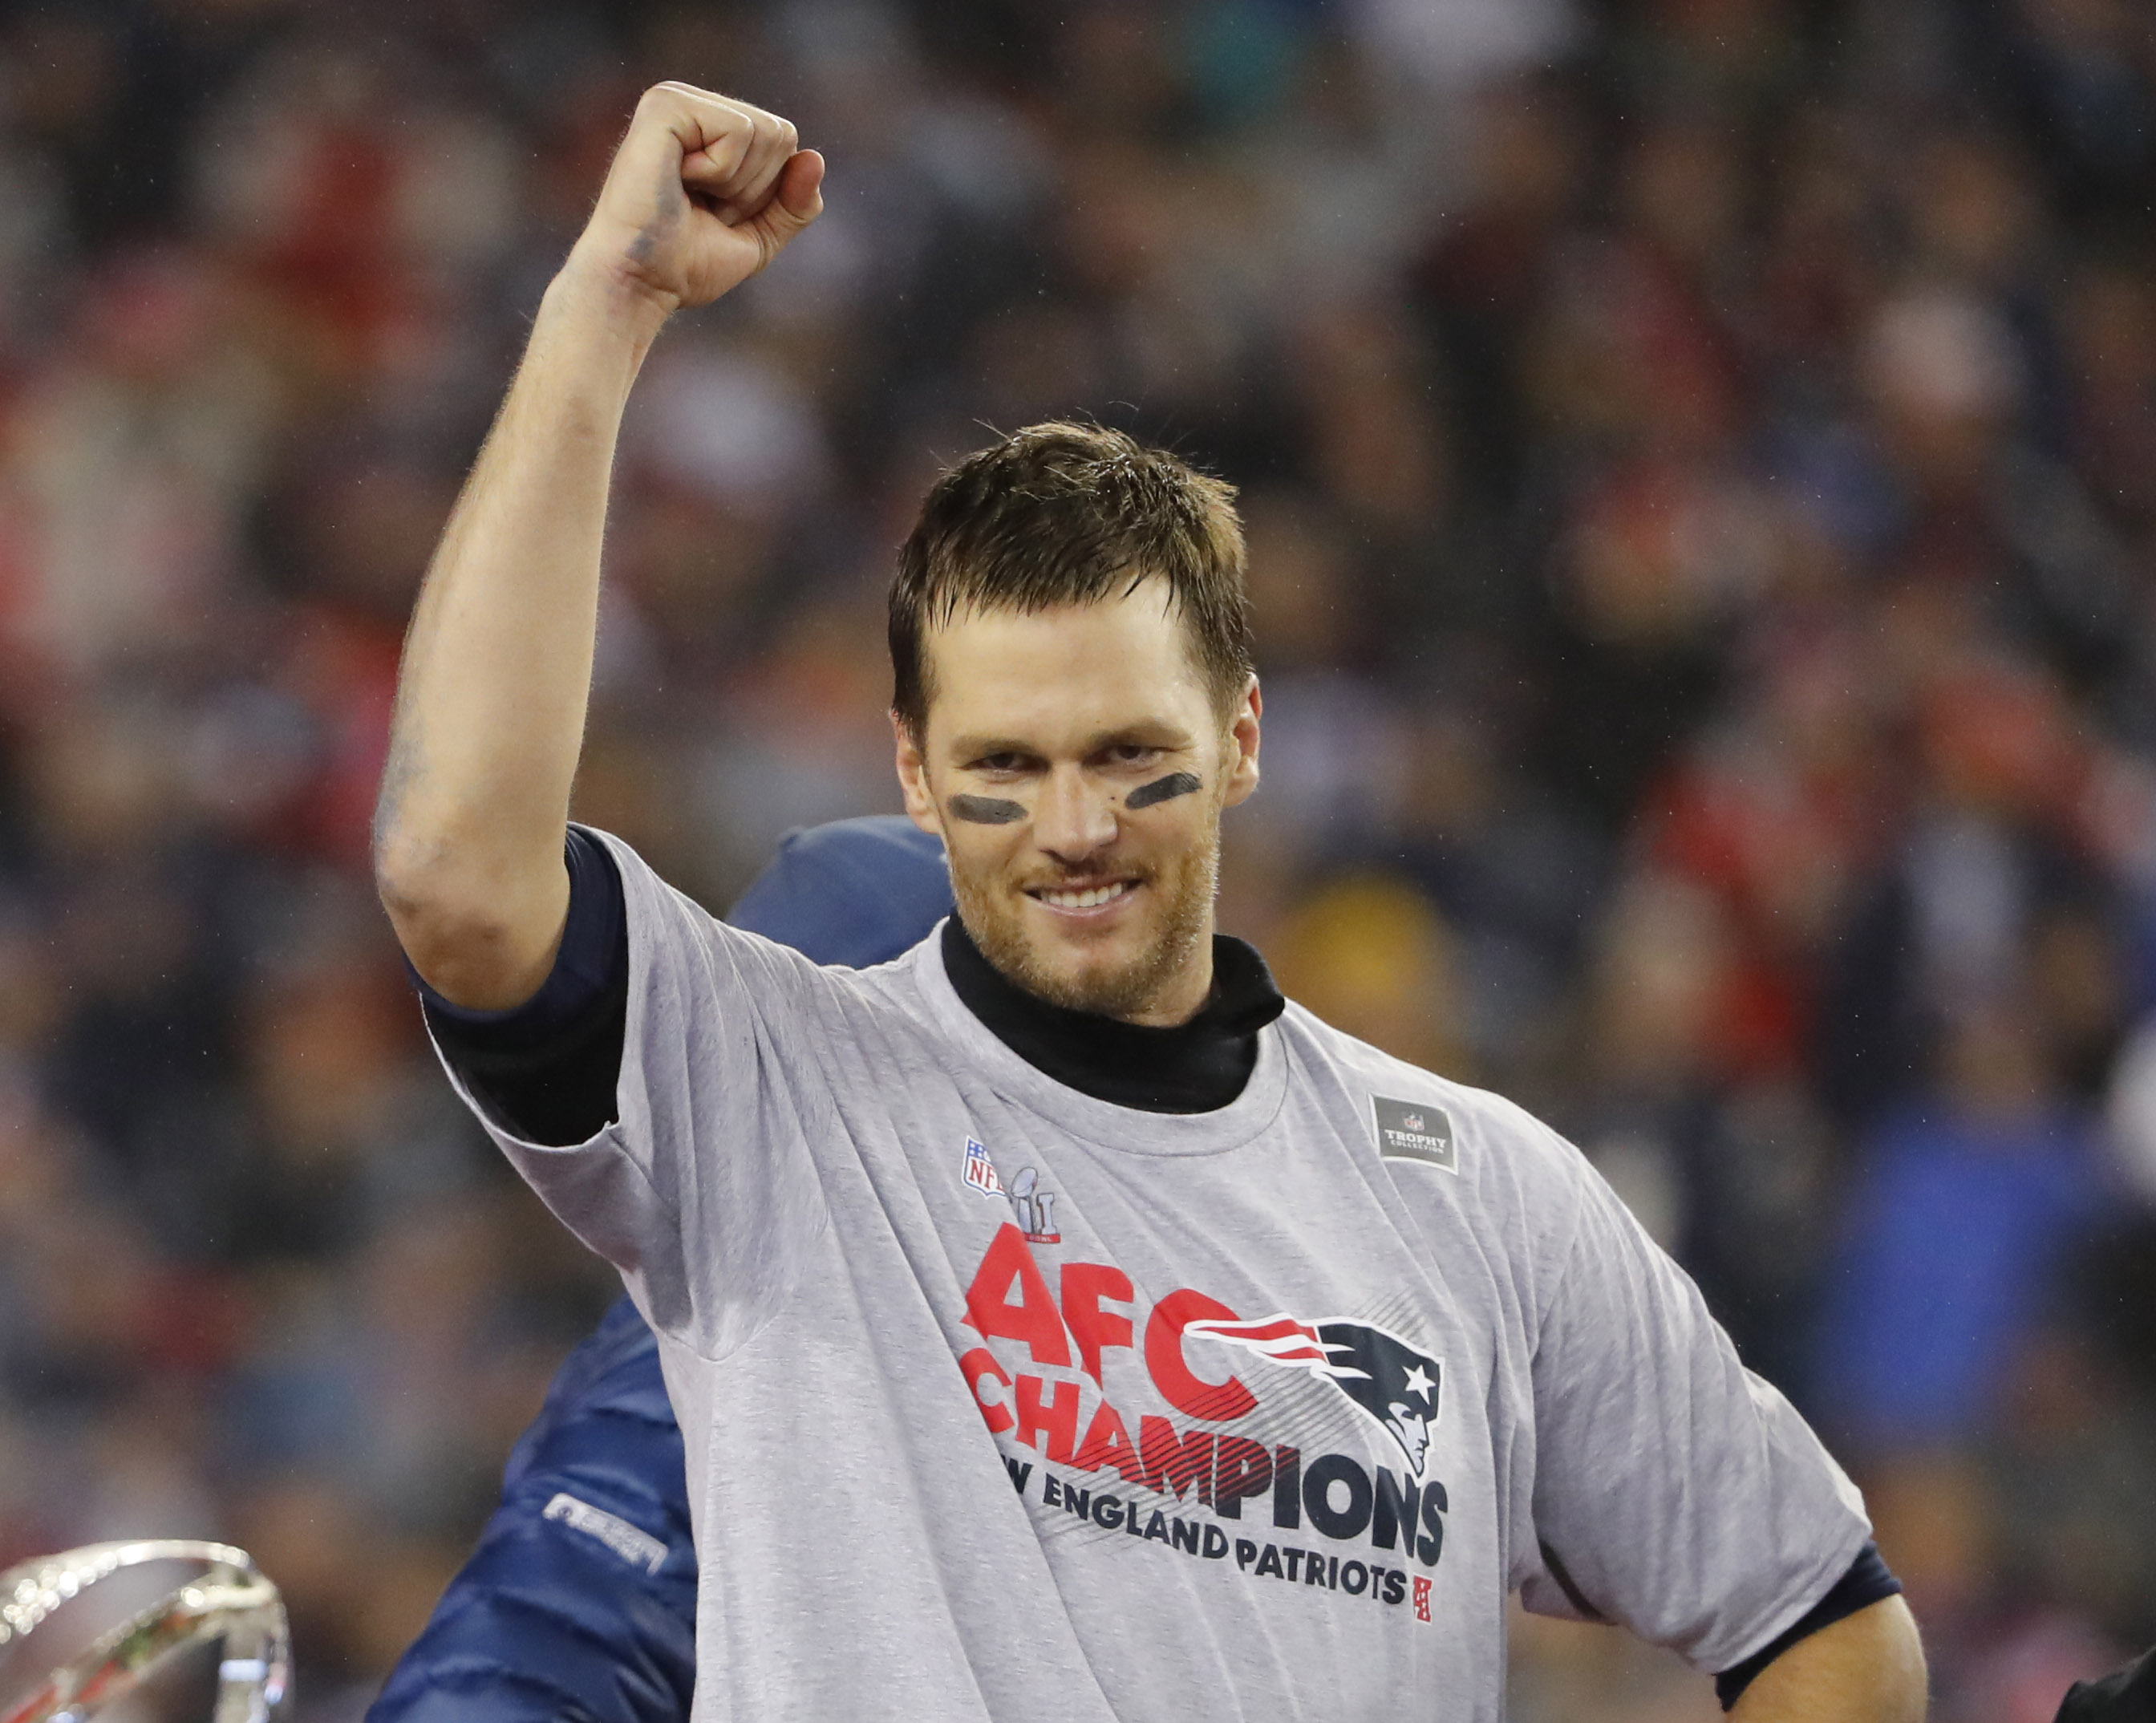 Jan 22, 2017; Foxborough, MA, USA; New England Patriots quarterback Tom Brady (12) celebrates after defeating the Pittsburgh Steelers in the 2017 AFC Championship Game at Gillette Stadium. Mandatory Credit: Winslow Townson-USA TODAY Sports ORG XMIT: USATSI-355518 ORIG FILE ID: 20170122_jel_bt1_132.jpg